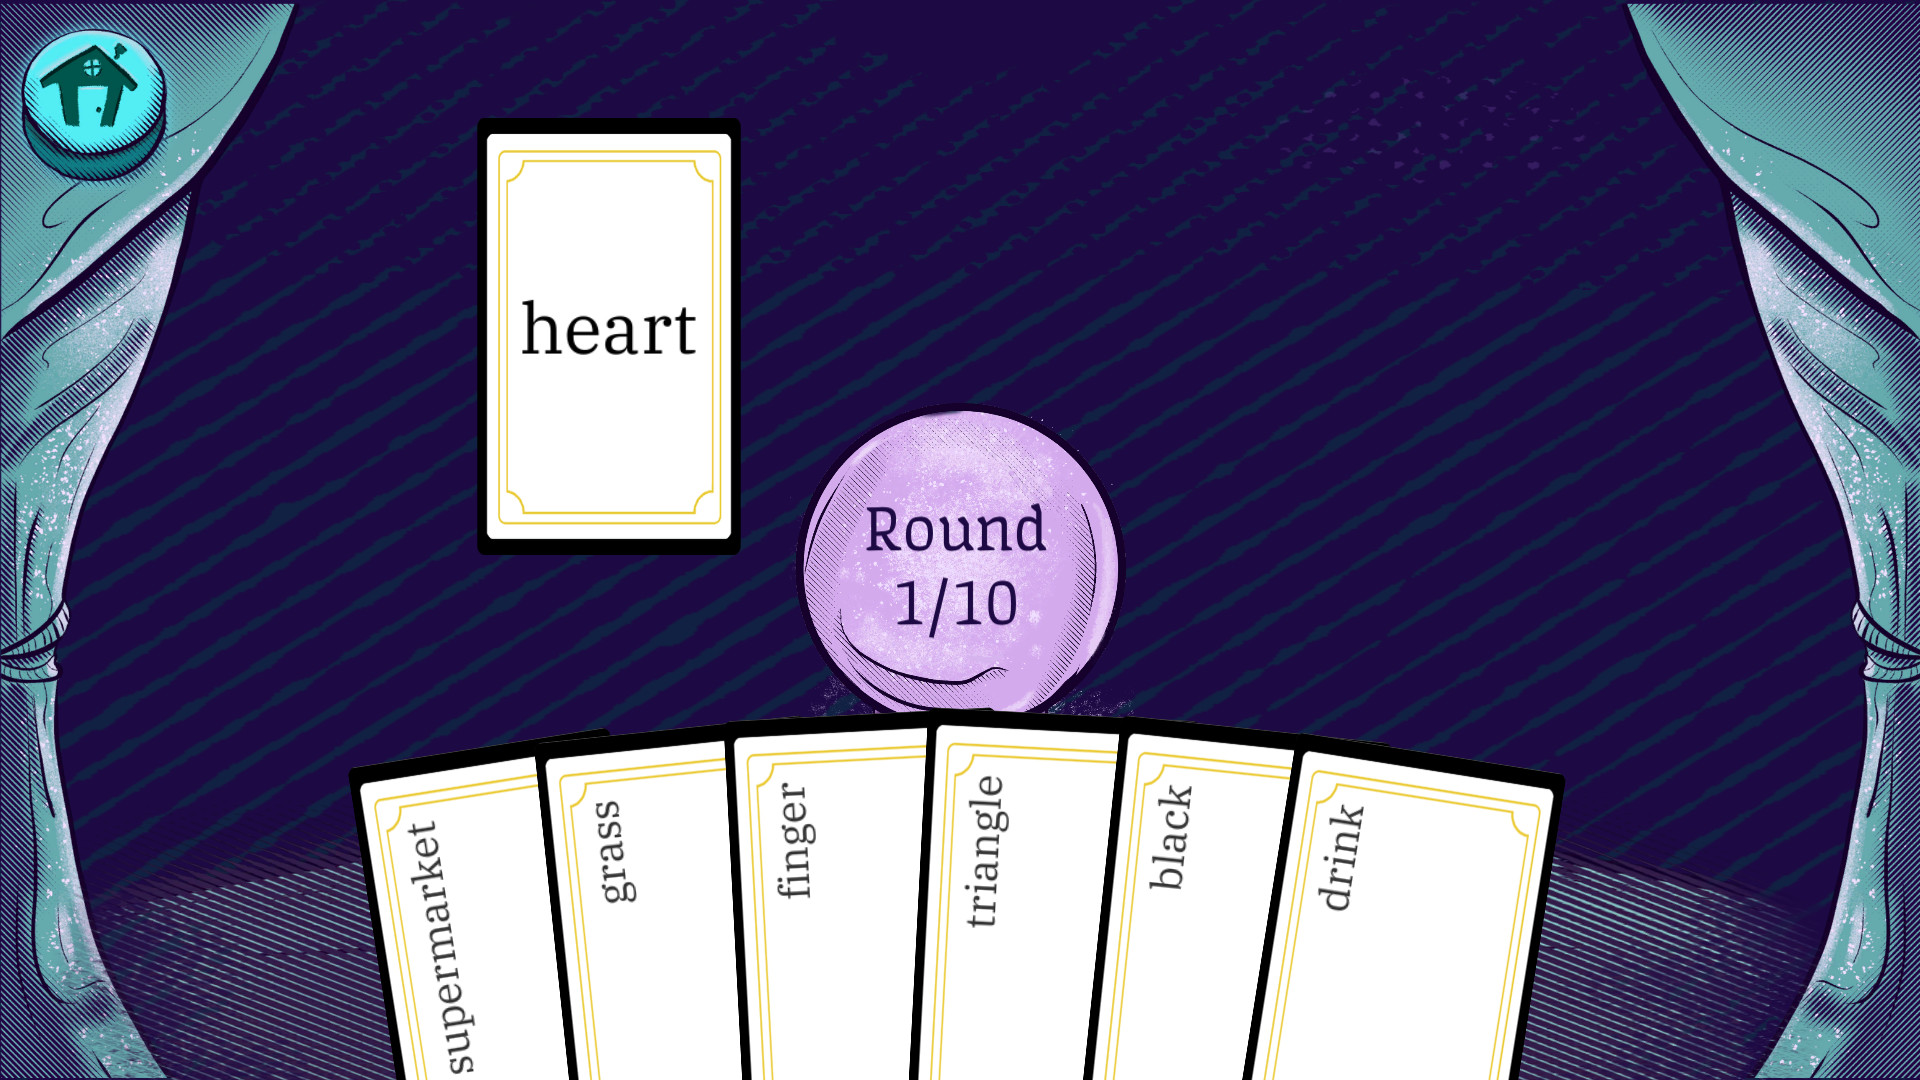 Medium: The Psychic Party Game Free Download